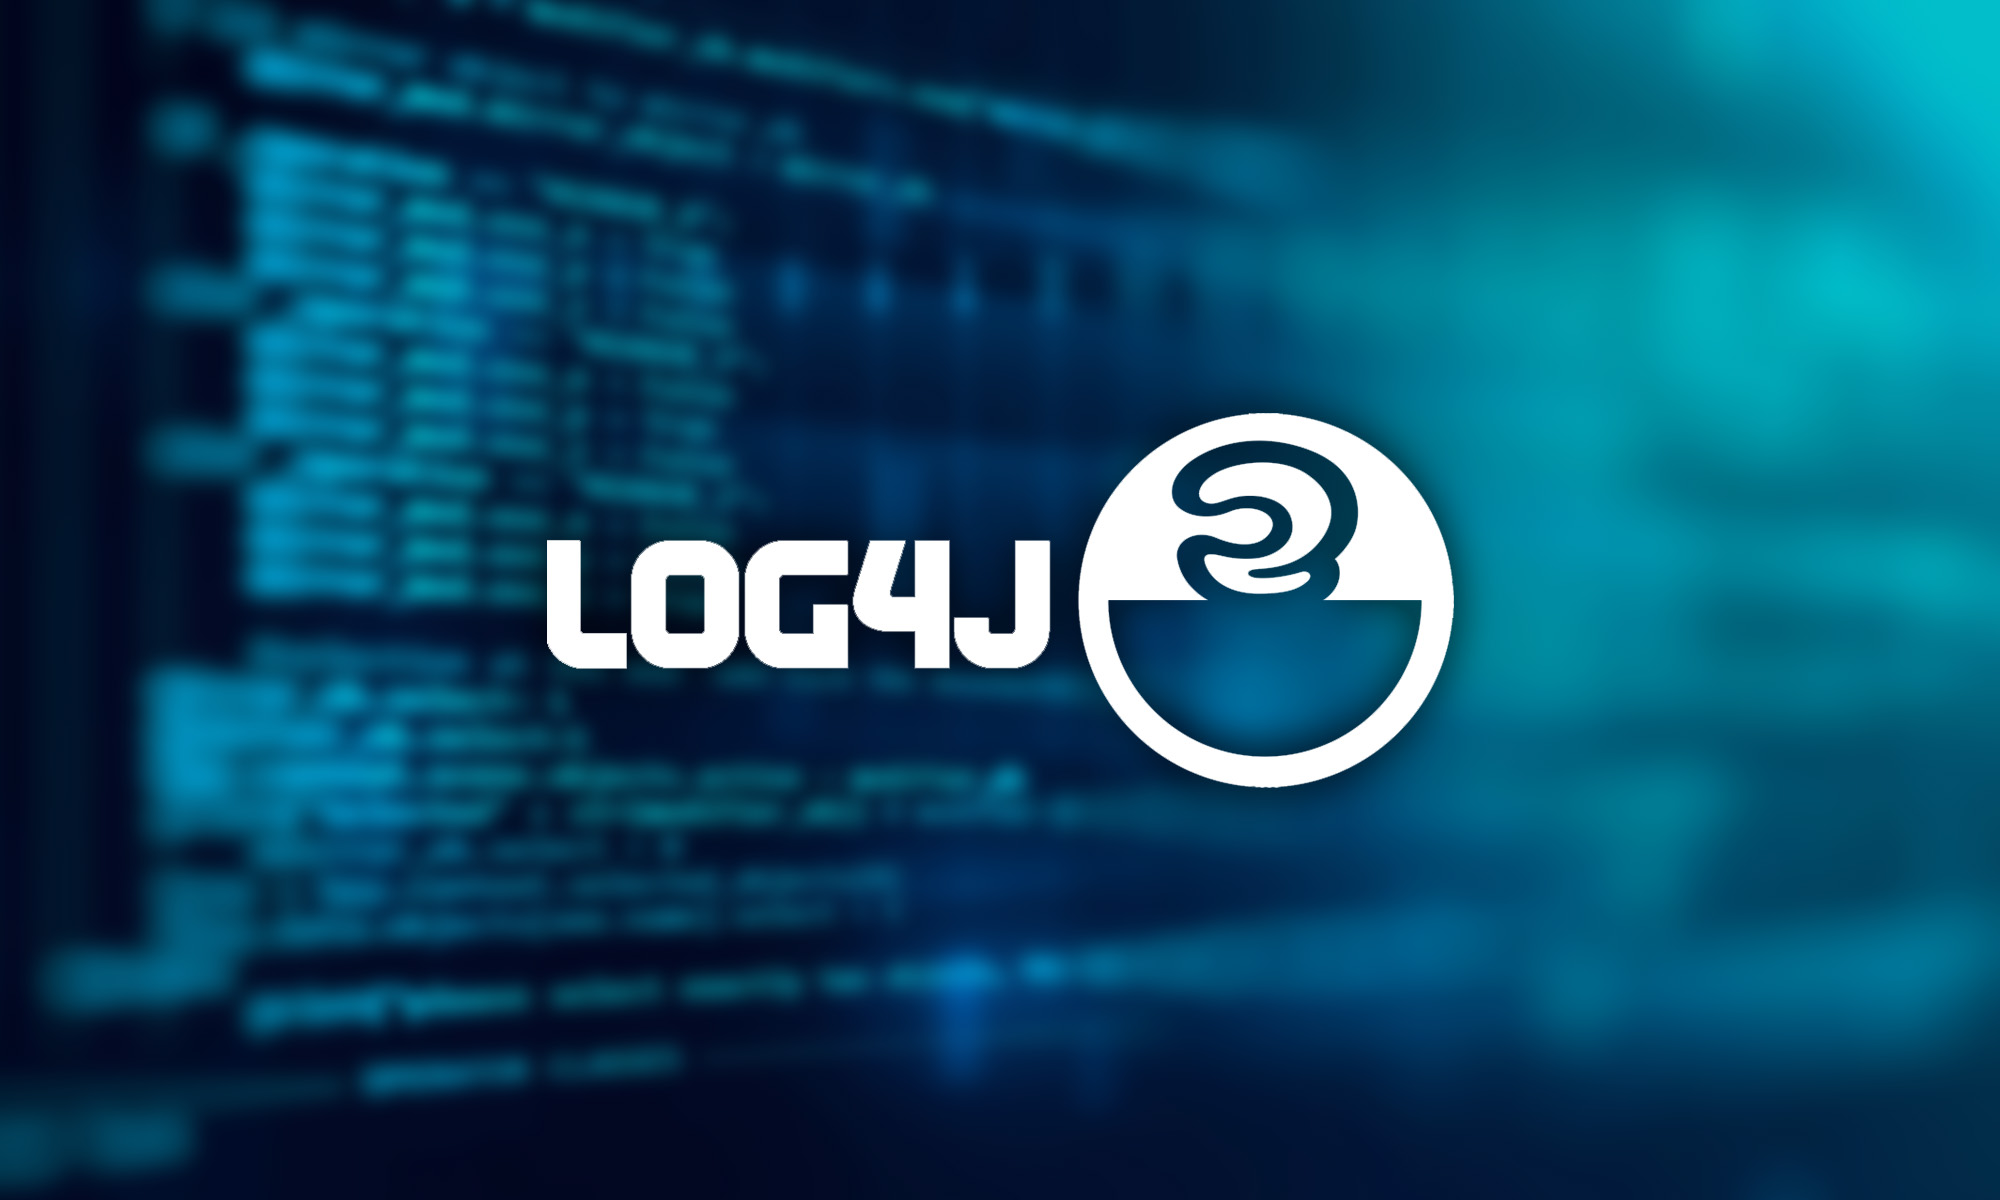 log4j vulnerability to wreak havoc on the internet for years to come